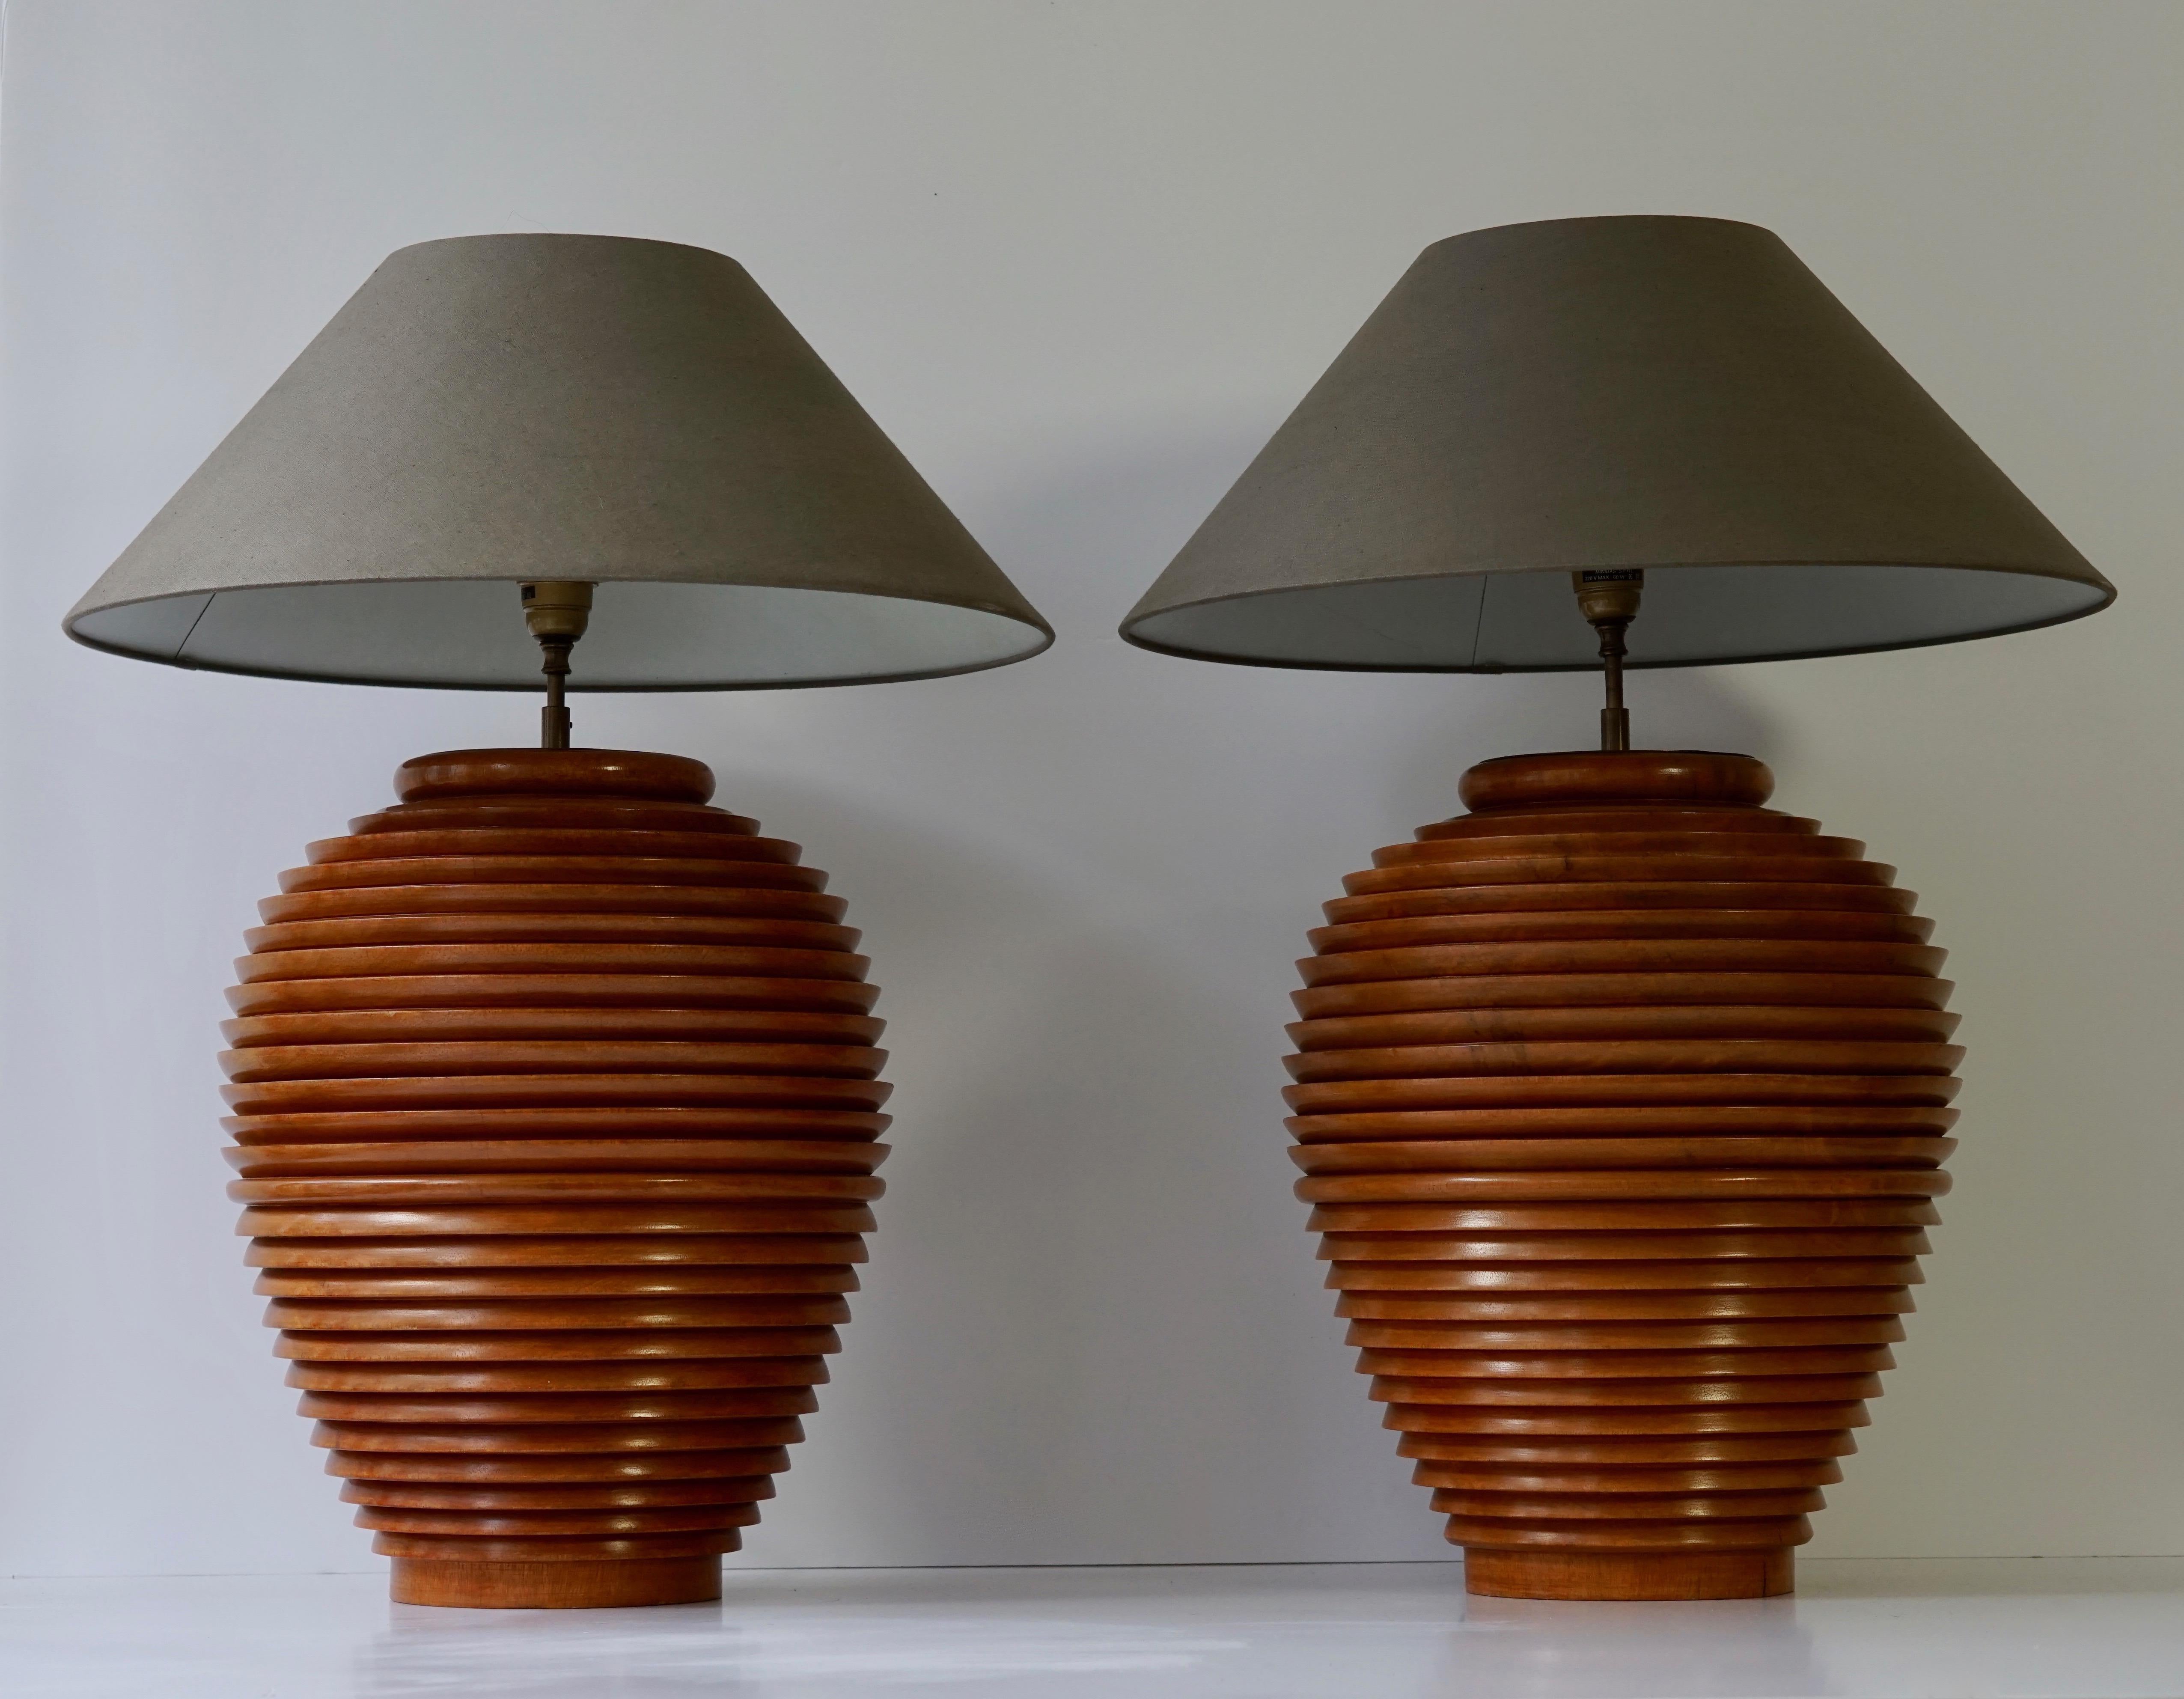 One beautiful old antique wooden stock pot from Burma converted in the 1970s into lamps.
The lamp with the damage is still available for sale.

Measures: 
Diameter wooden base 36 cm.
Height base without socket 46 cm.

Shades are not included.